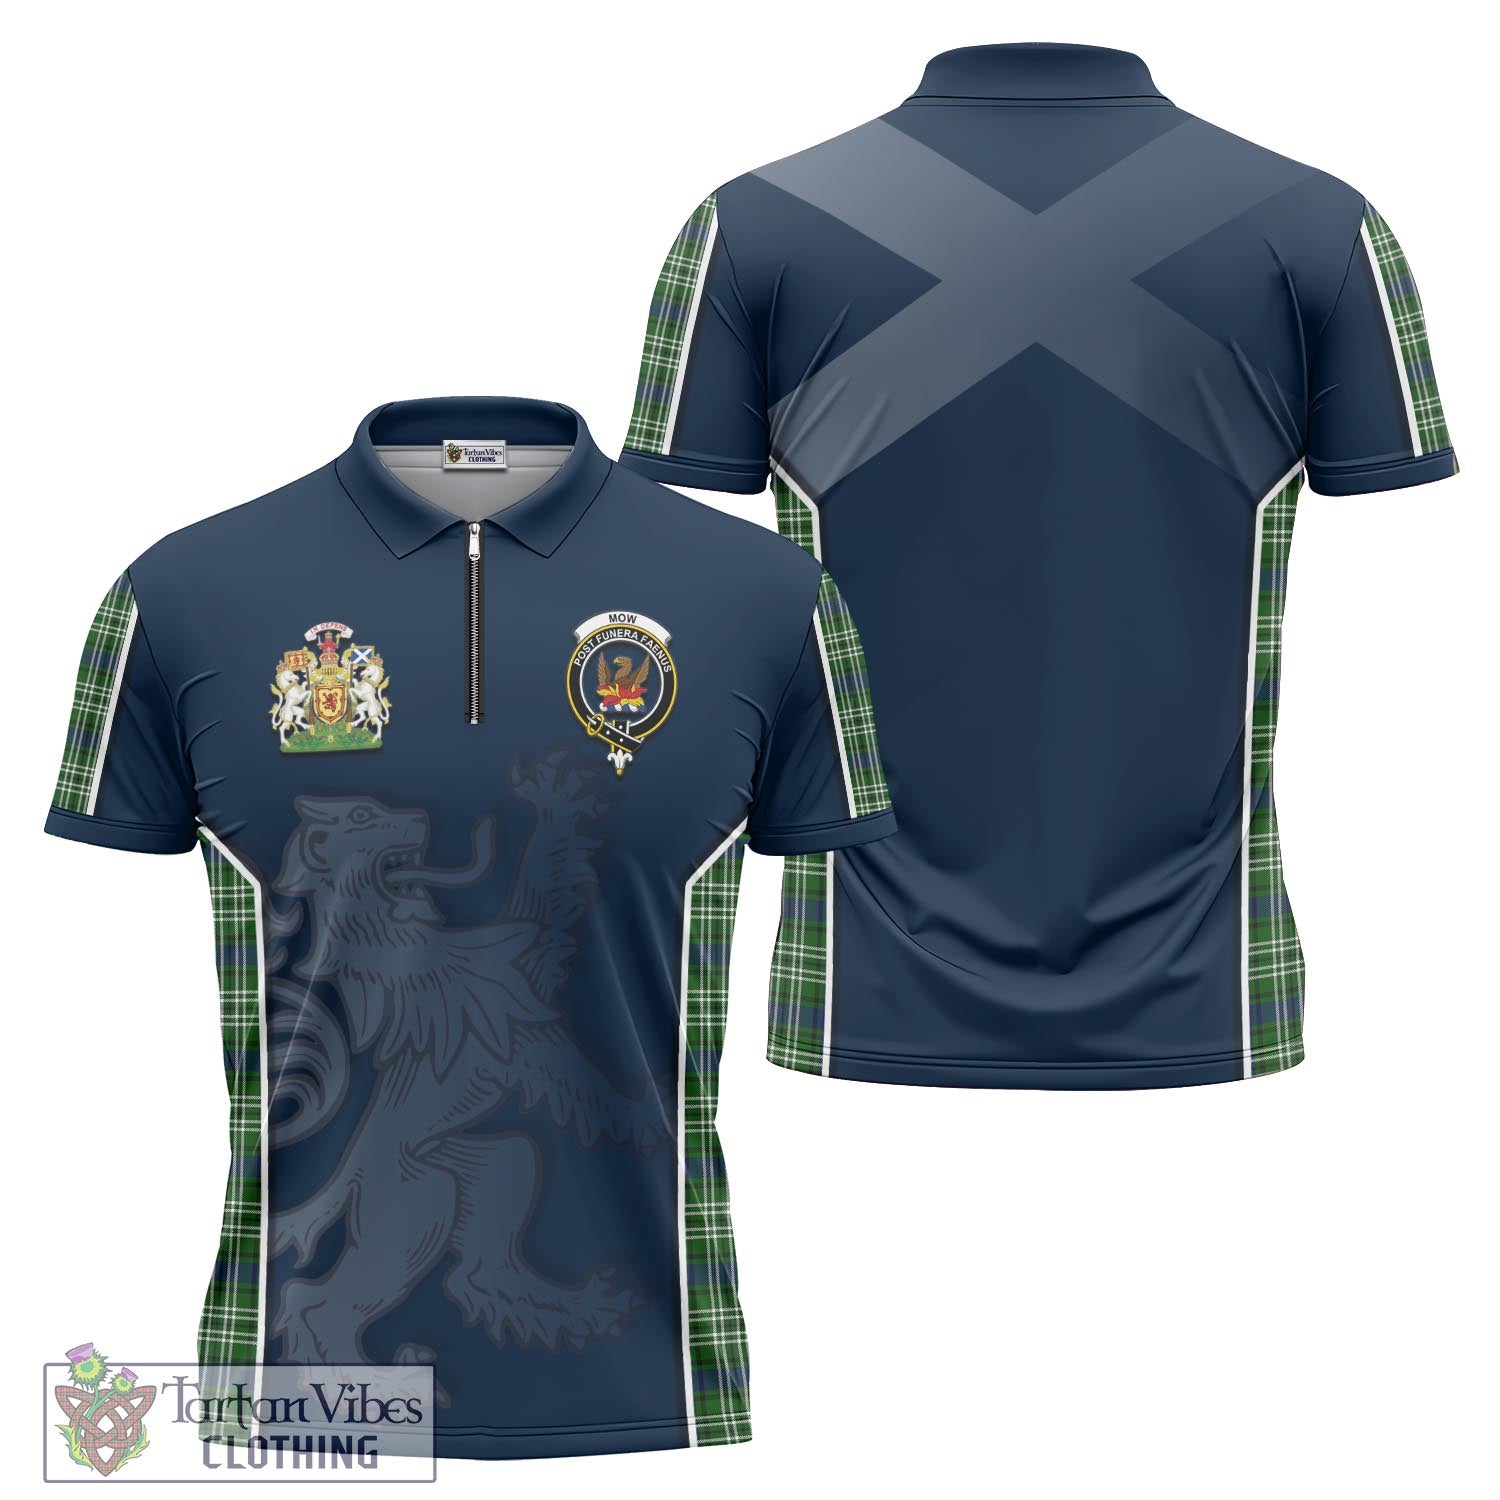 Tartan Vibes Clothing Mow Tartan Zipper Polo Shirt with Family Crest and Lion Rampant Vibes Sport Style